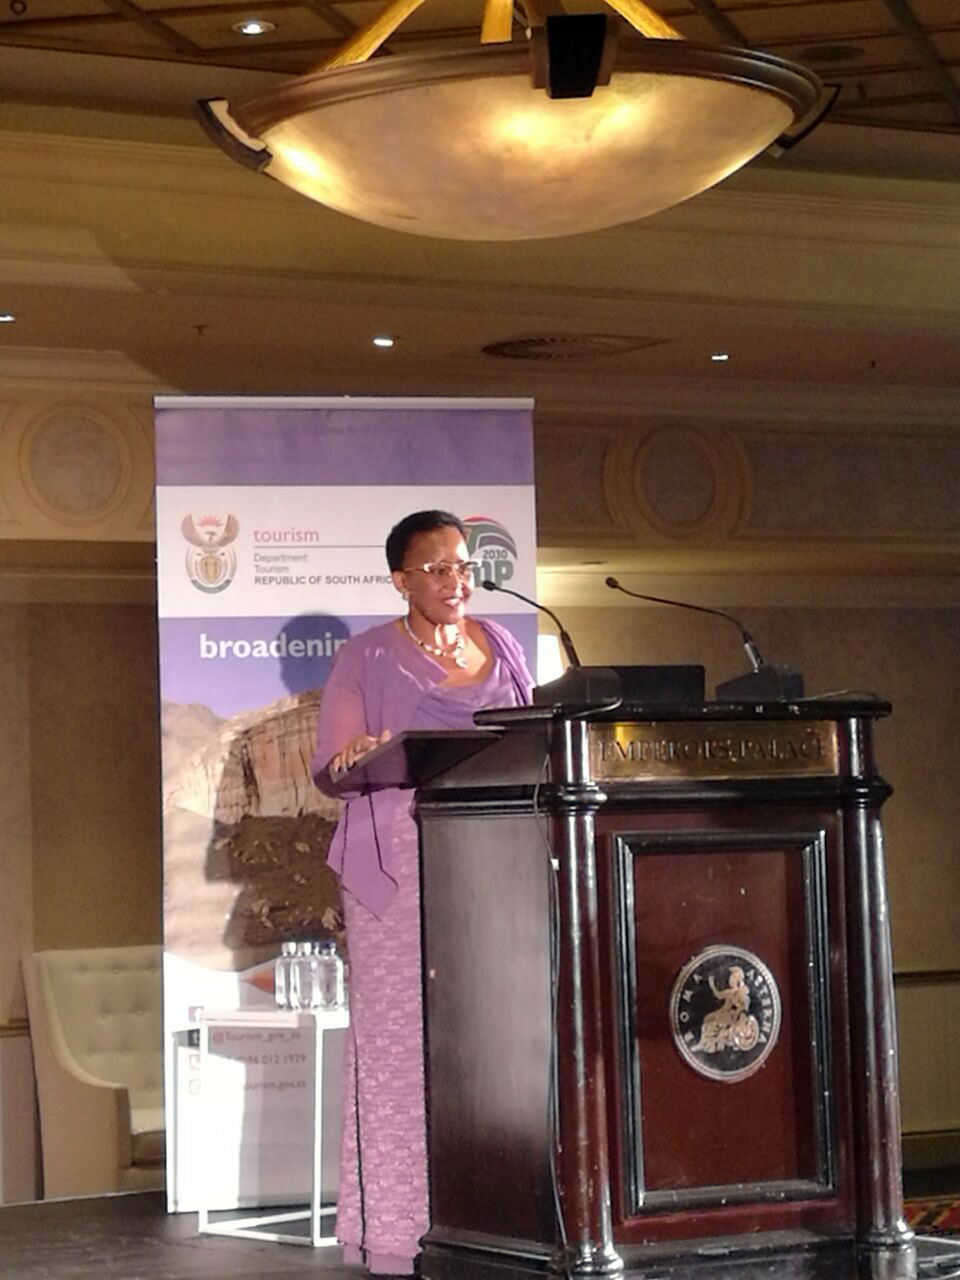 Keynote address by Tourism Minister Tokozile Xasa at the Local Government Tourism Conference 2017